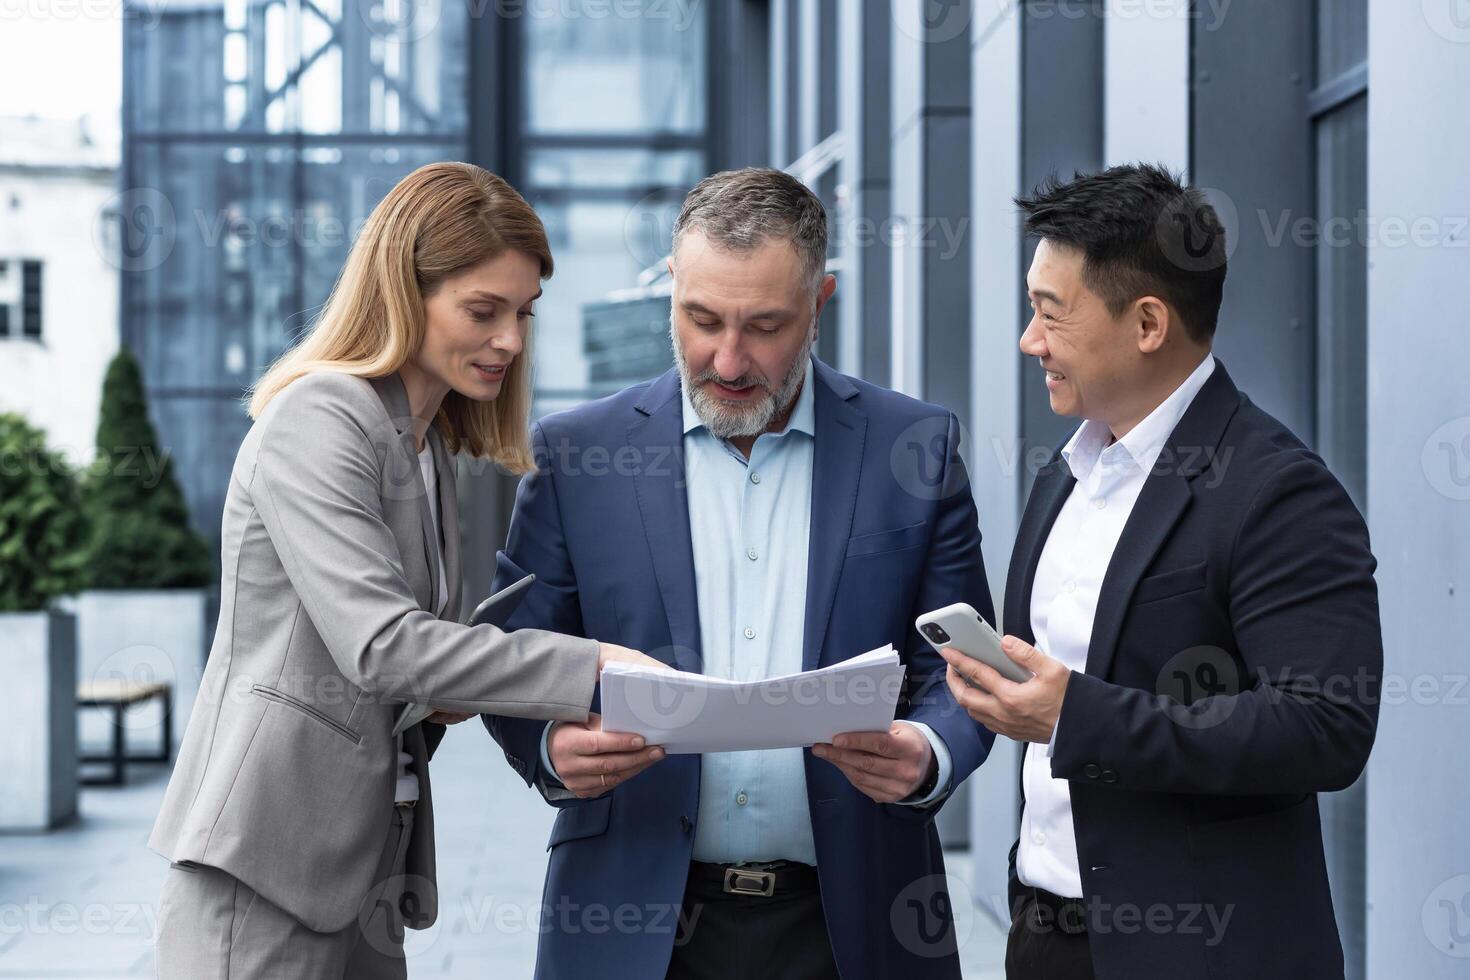 Three businessmen outside office building with documents discussing plans, businessmen and businesswoman having fun chatting and talking, diverse business group in business suits photo